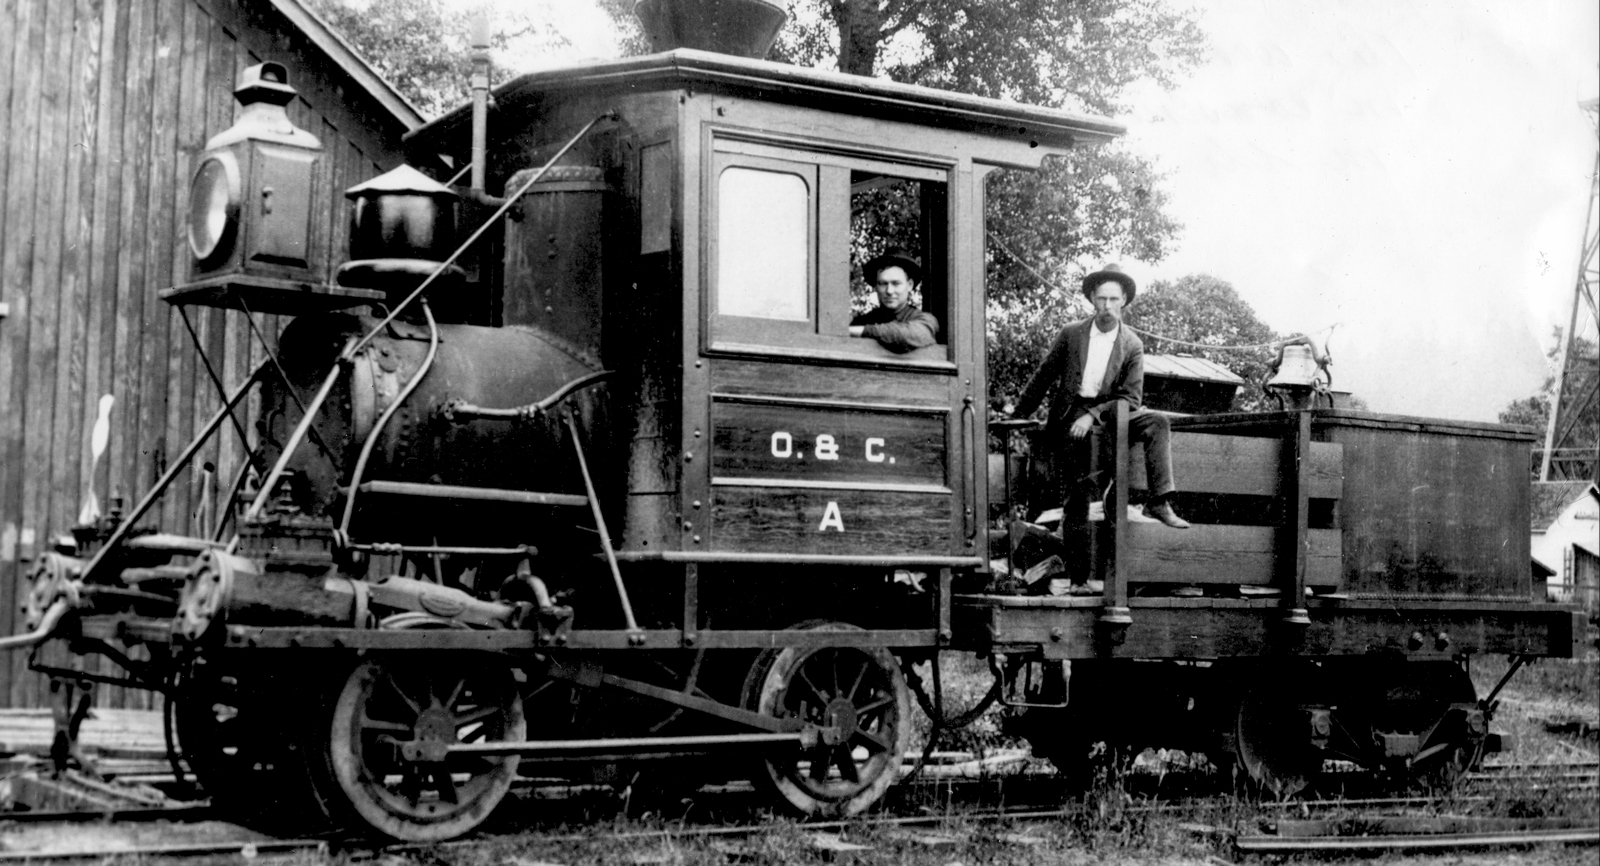 “Old Betsy” of the Oregon & California Railroad in 1905 when this photo was taken was believed to be one of the smallest 0-4-0 tender locomotives in North America